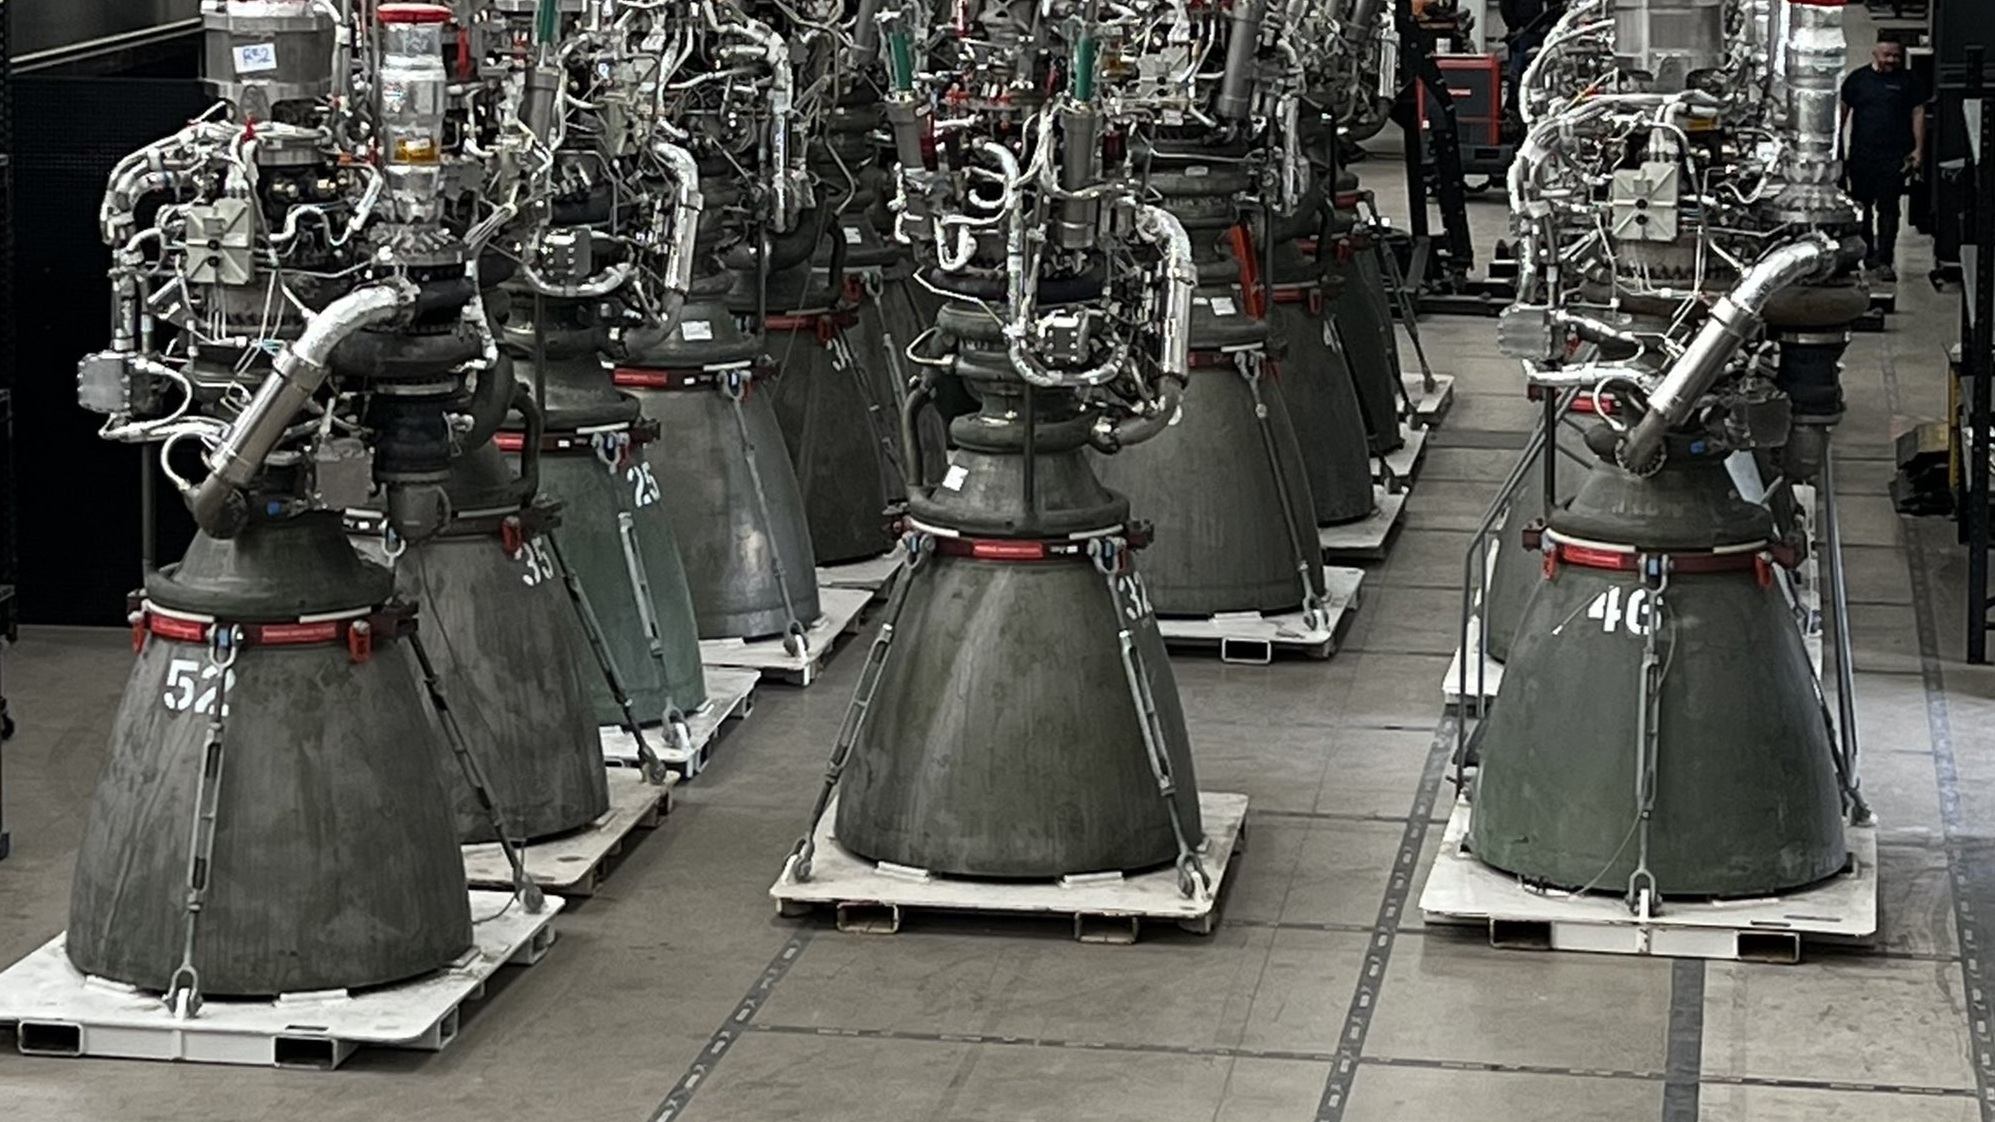 Elon Musk shared this view of a batch of SpaceX Raptor 2 engines awaiting integration into a Starship rocket at the company's Starbase facility near Boca Chica, Texas on April 26, 2022. Twitter fans saw an eerie resemblance to the Doctor Who villians, the Daleks.